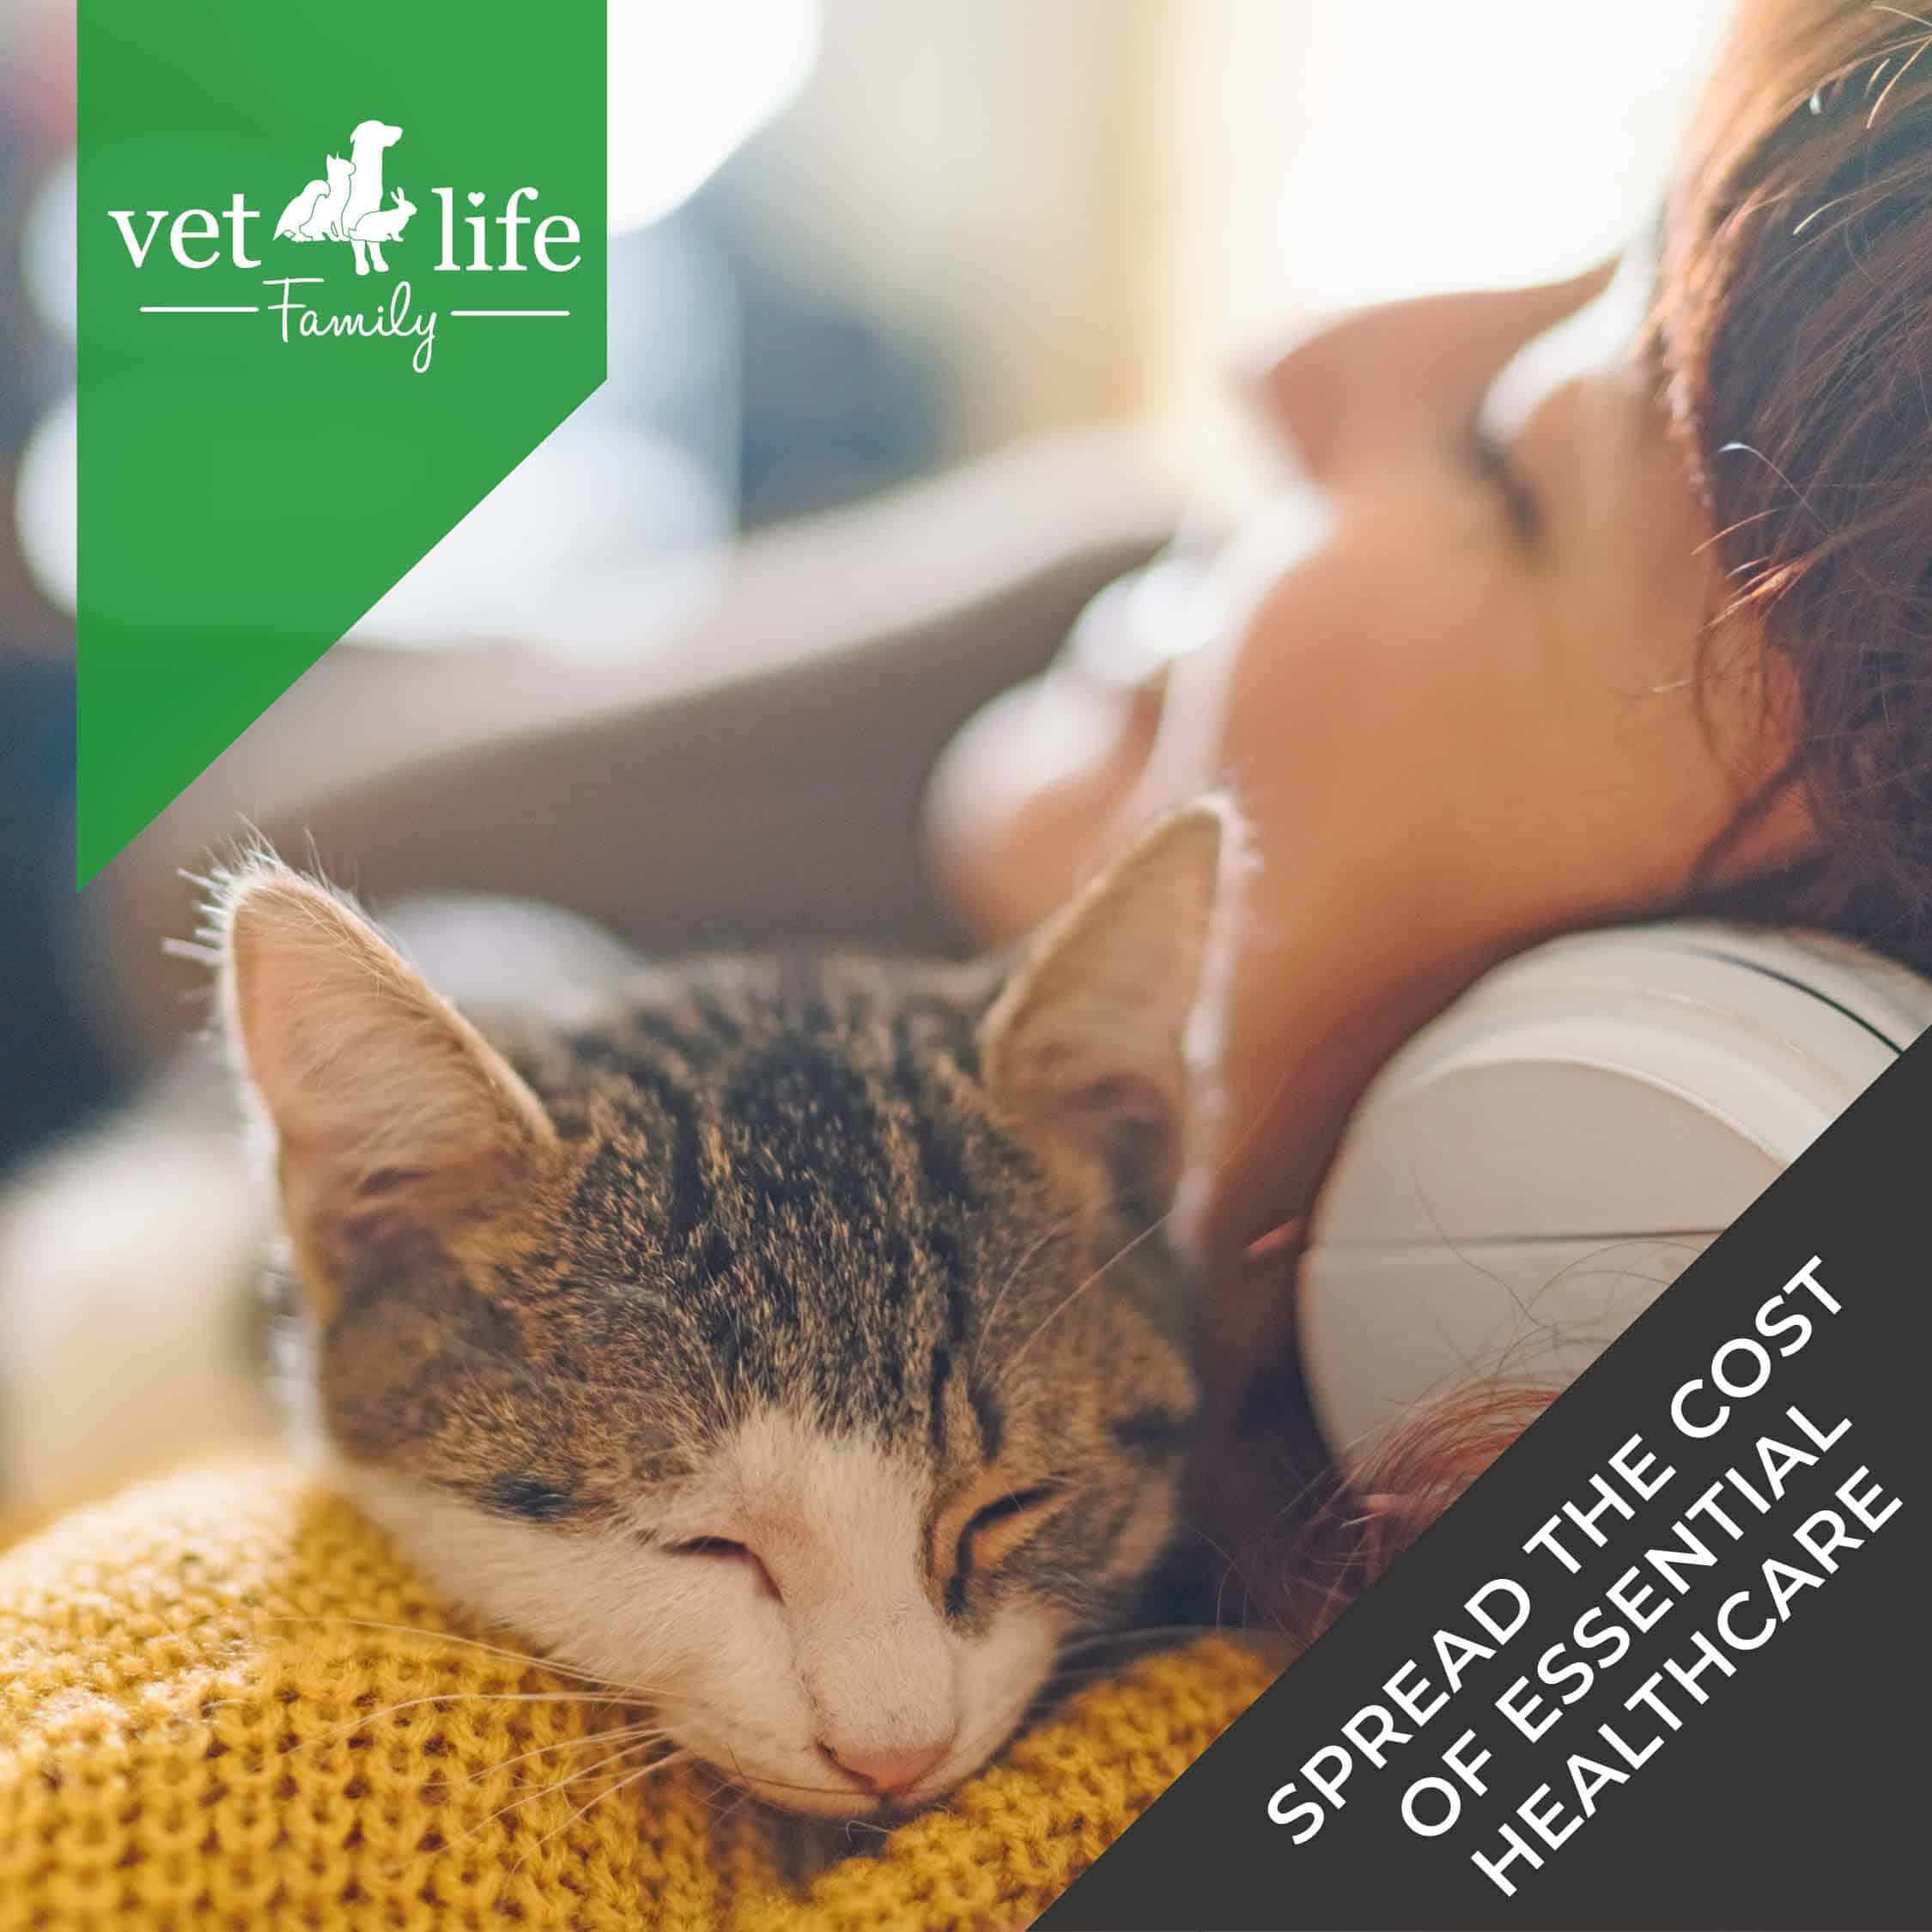 5 benefits to joining our Vet4life Family Plan